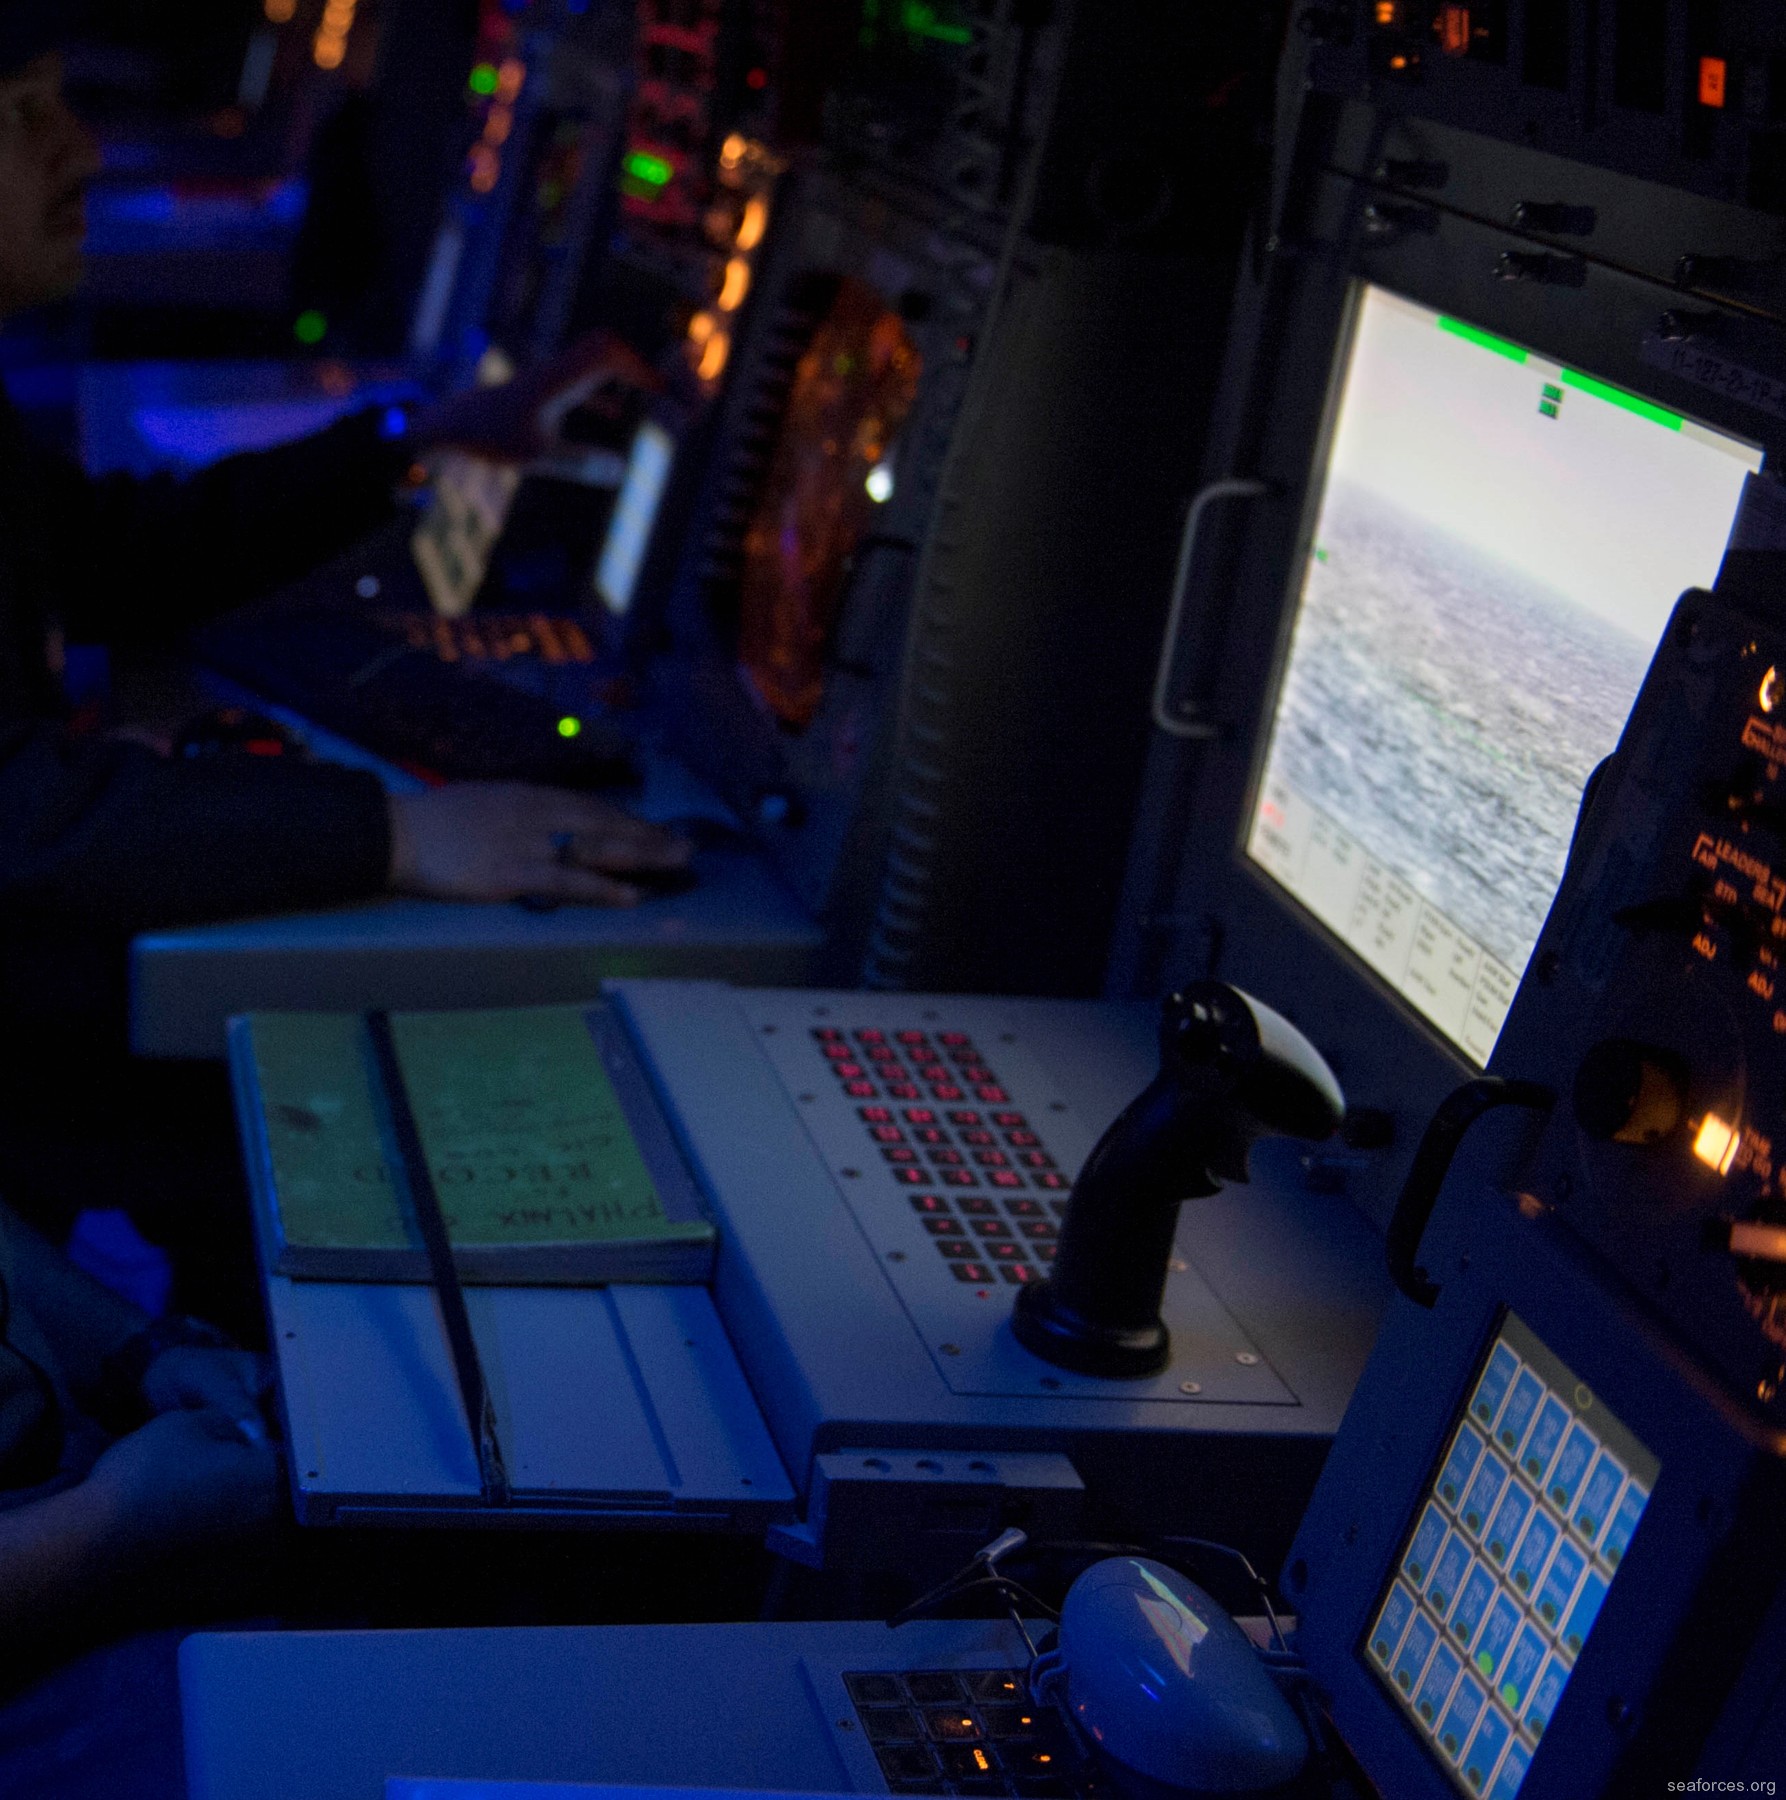 ddg-55 uss stout guided missile destroyer us navy 33 mk-15 phalanx ciws operator console